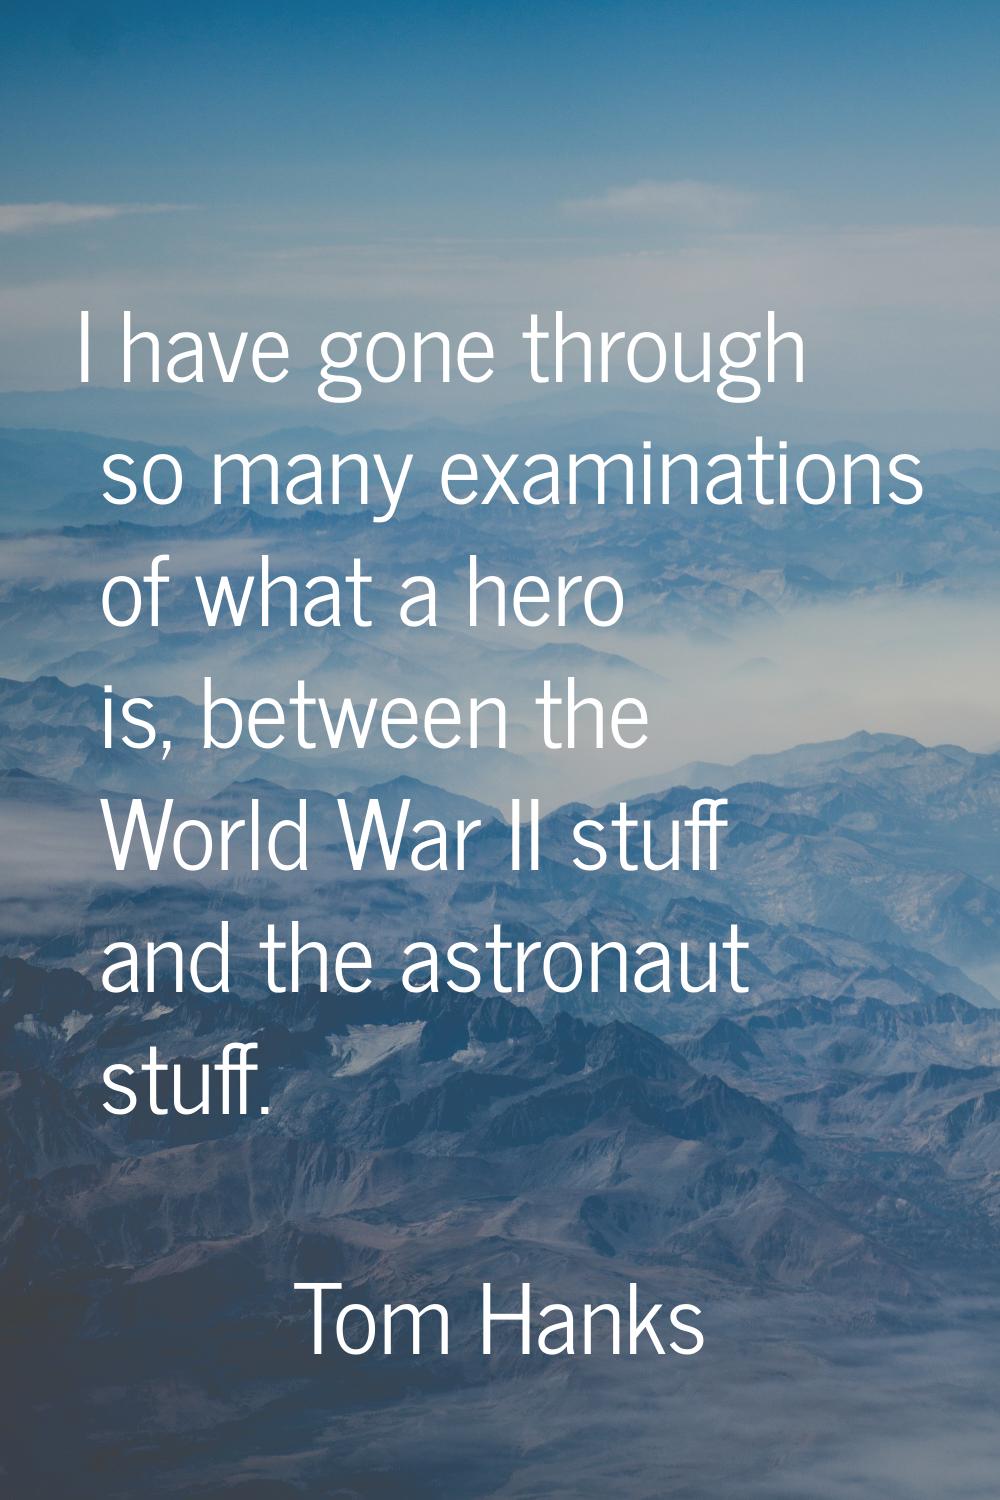 I have gone through so many examinations of what a hero is, between the World War II stuff and the 